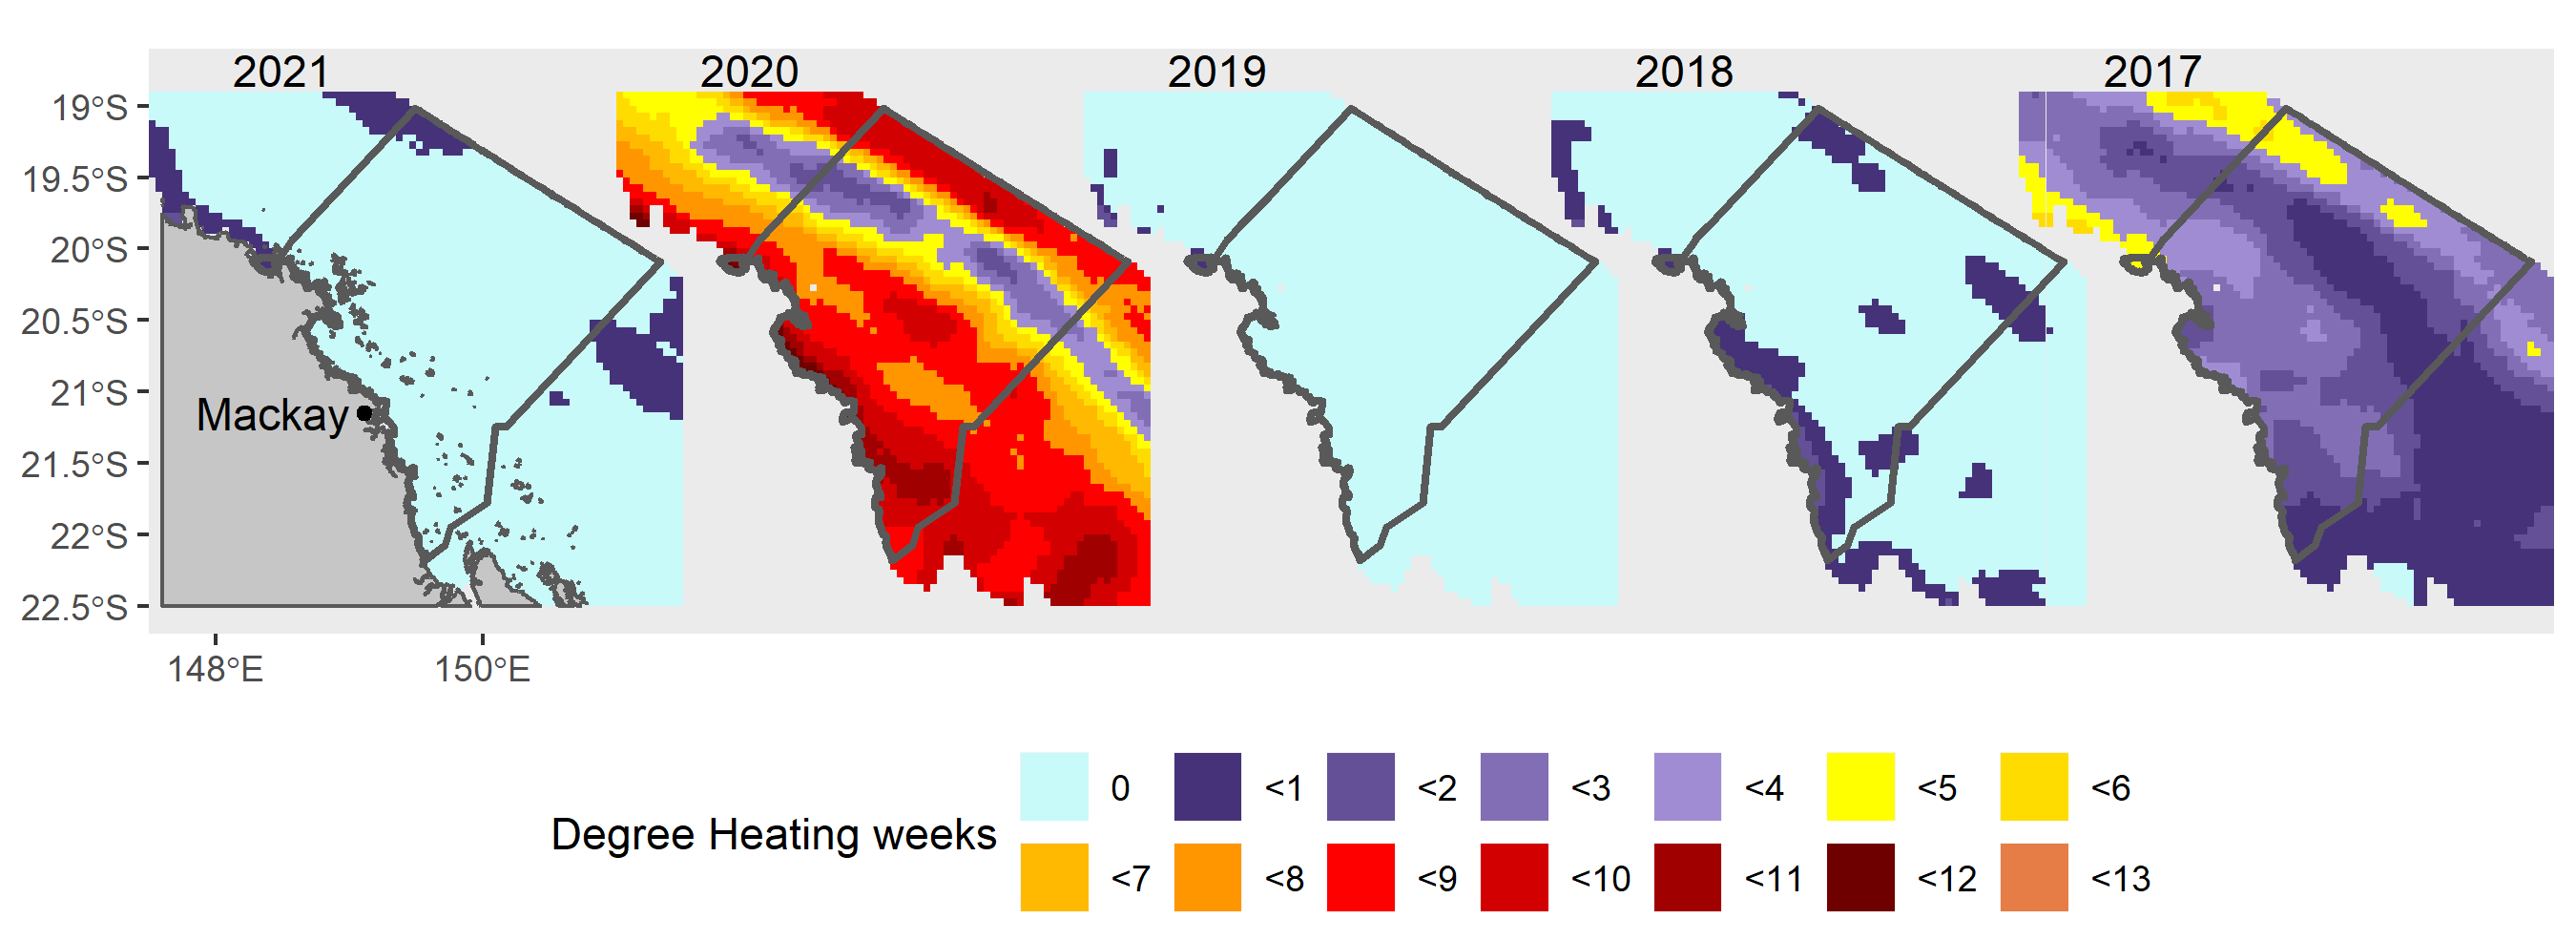 Degree Heating Weeks in the MWI region over a five year period